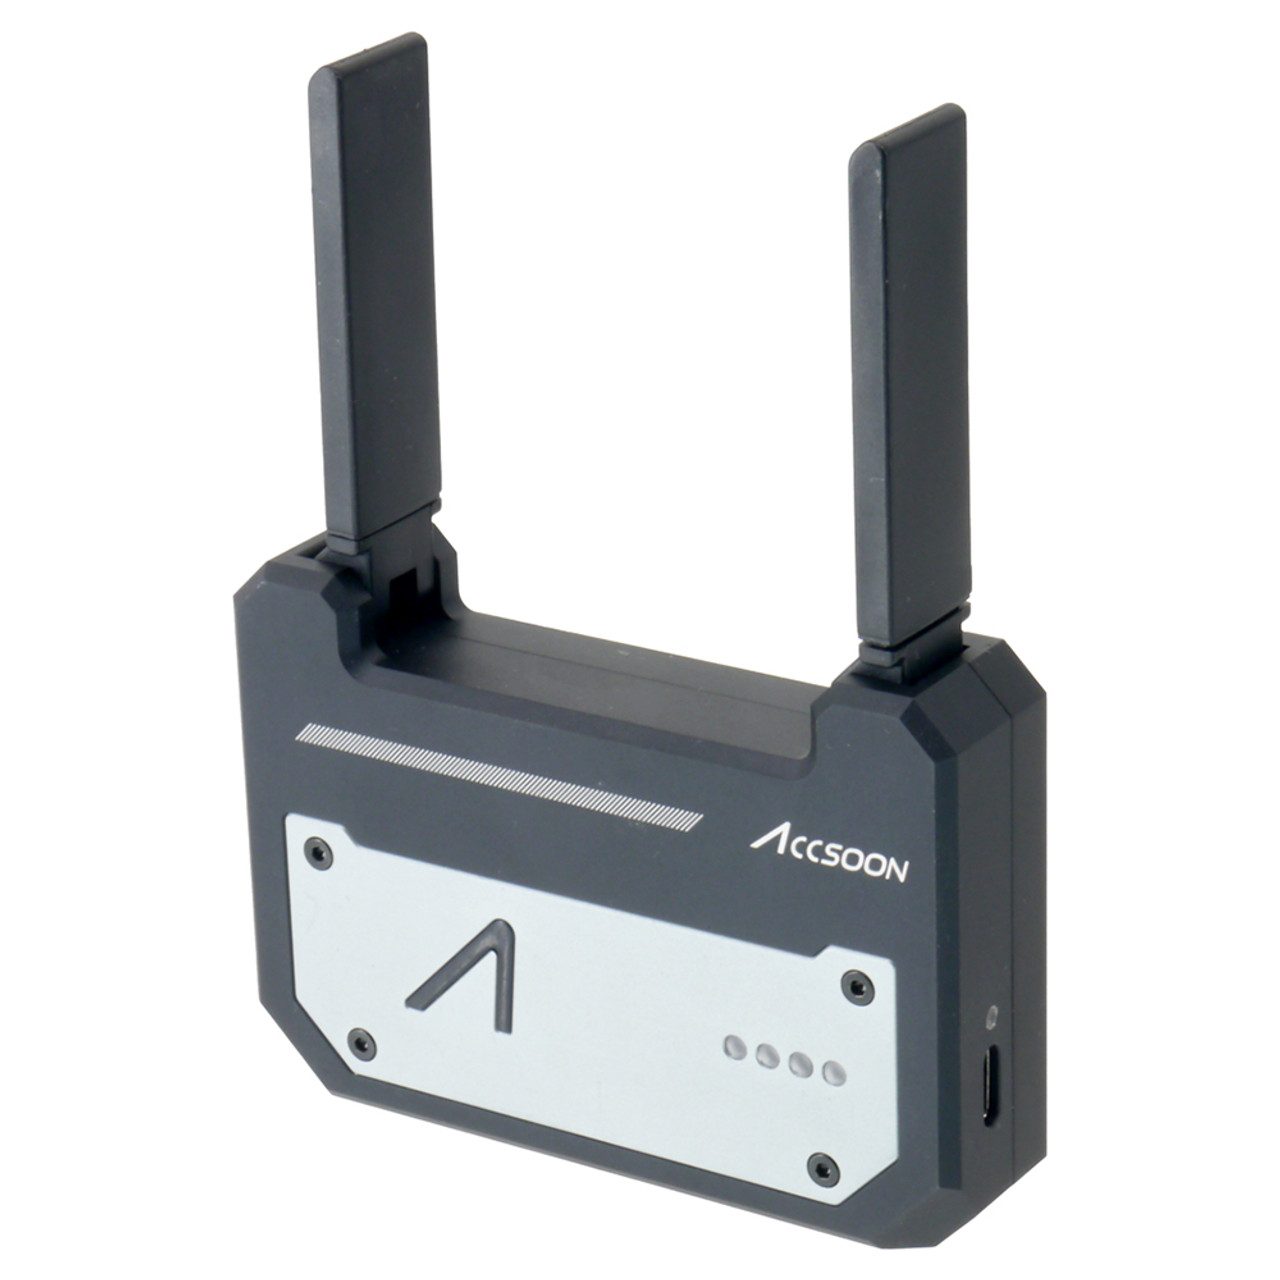 USED ASCOON 5G WIRELESS TRANSMITTER